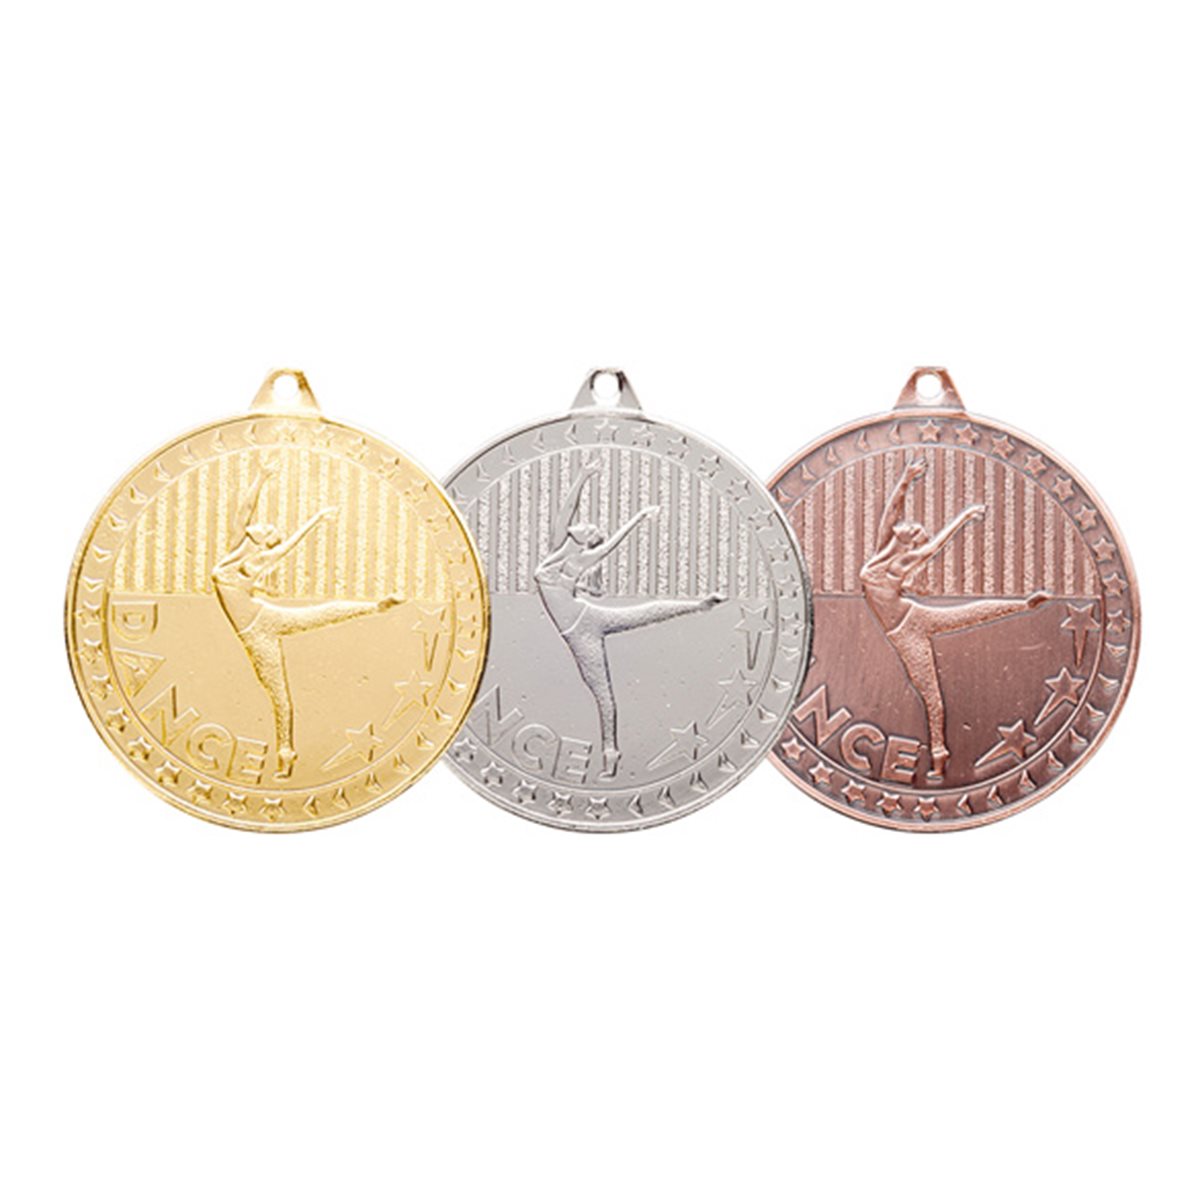 Discovery Dance Medal 50mm in Gold, Silver and Bronze MM17127